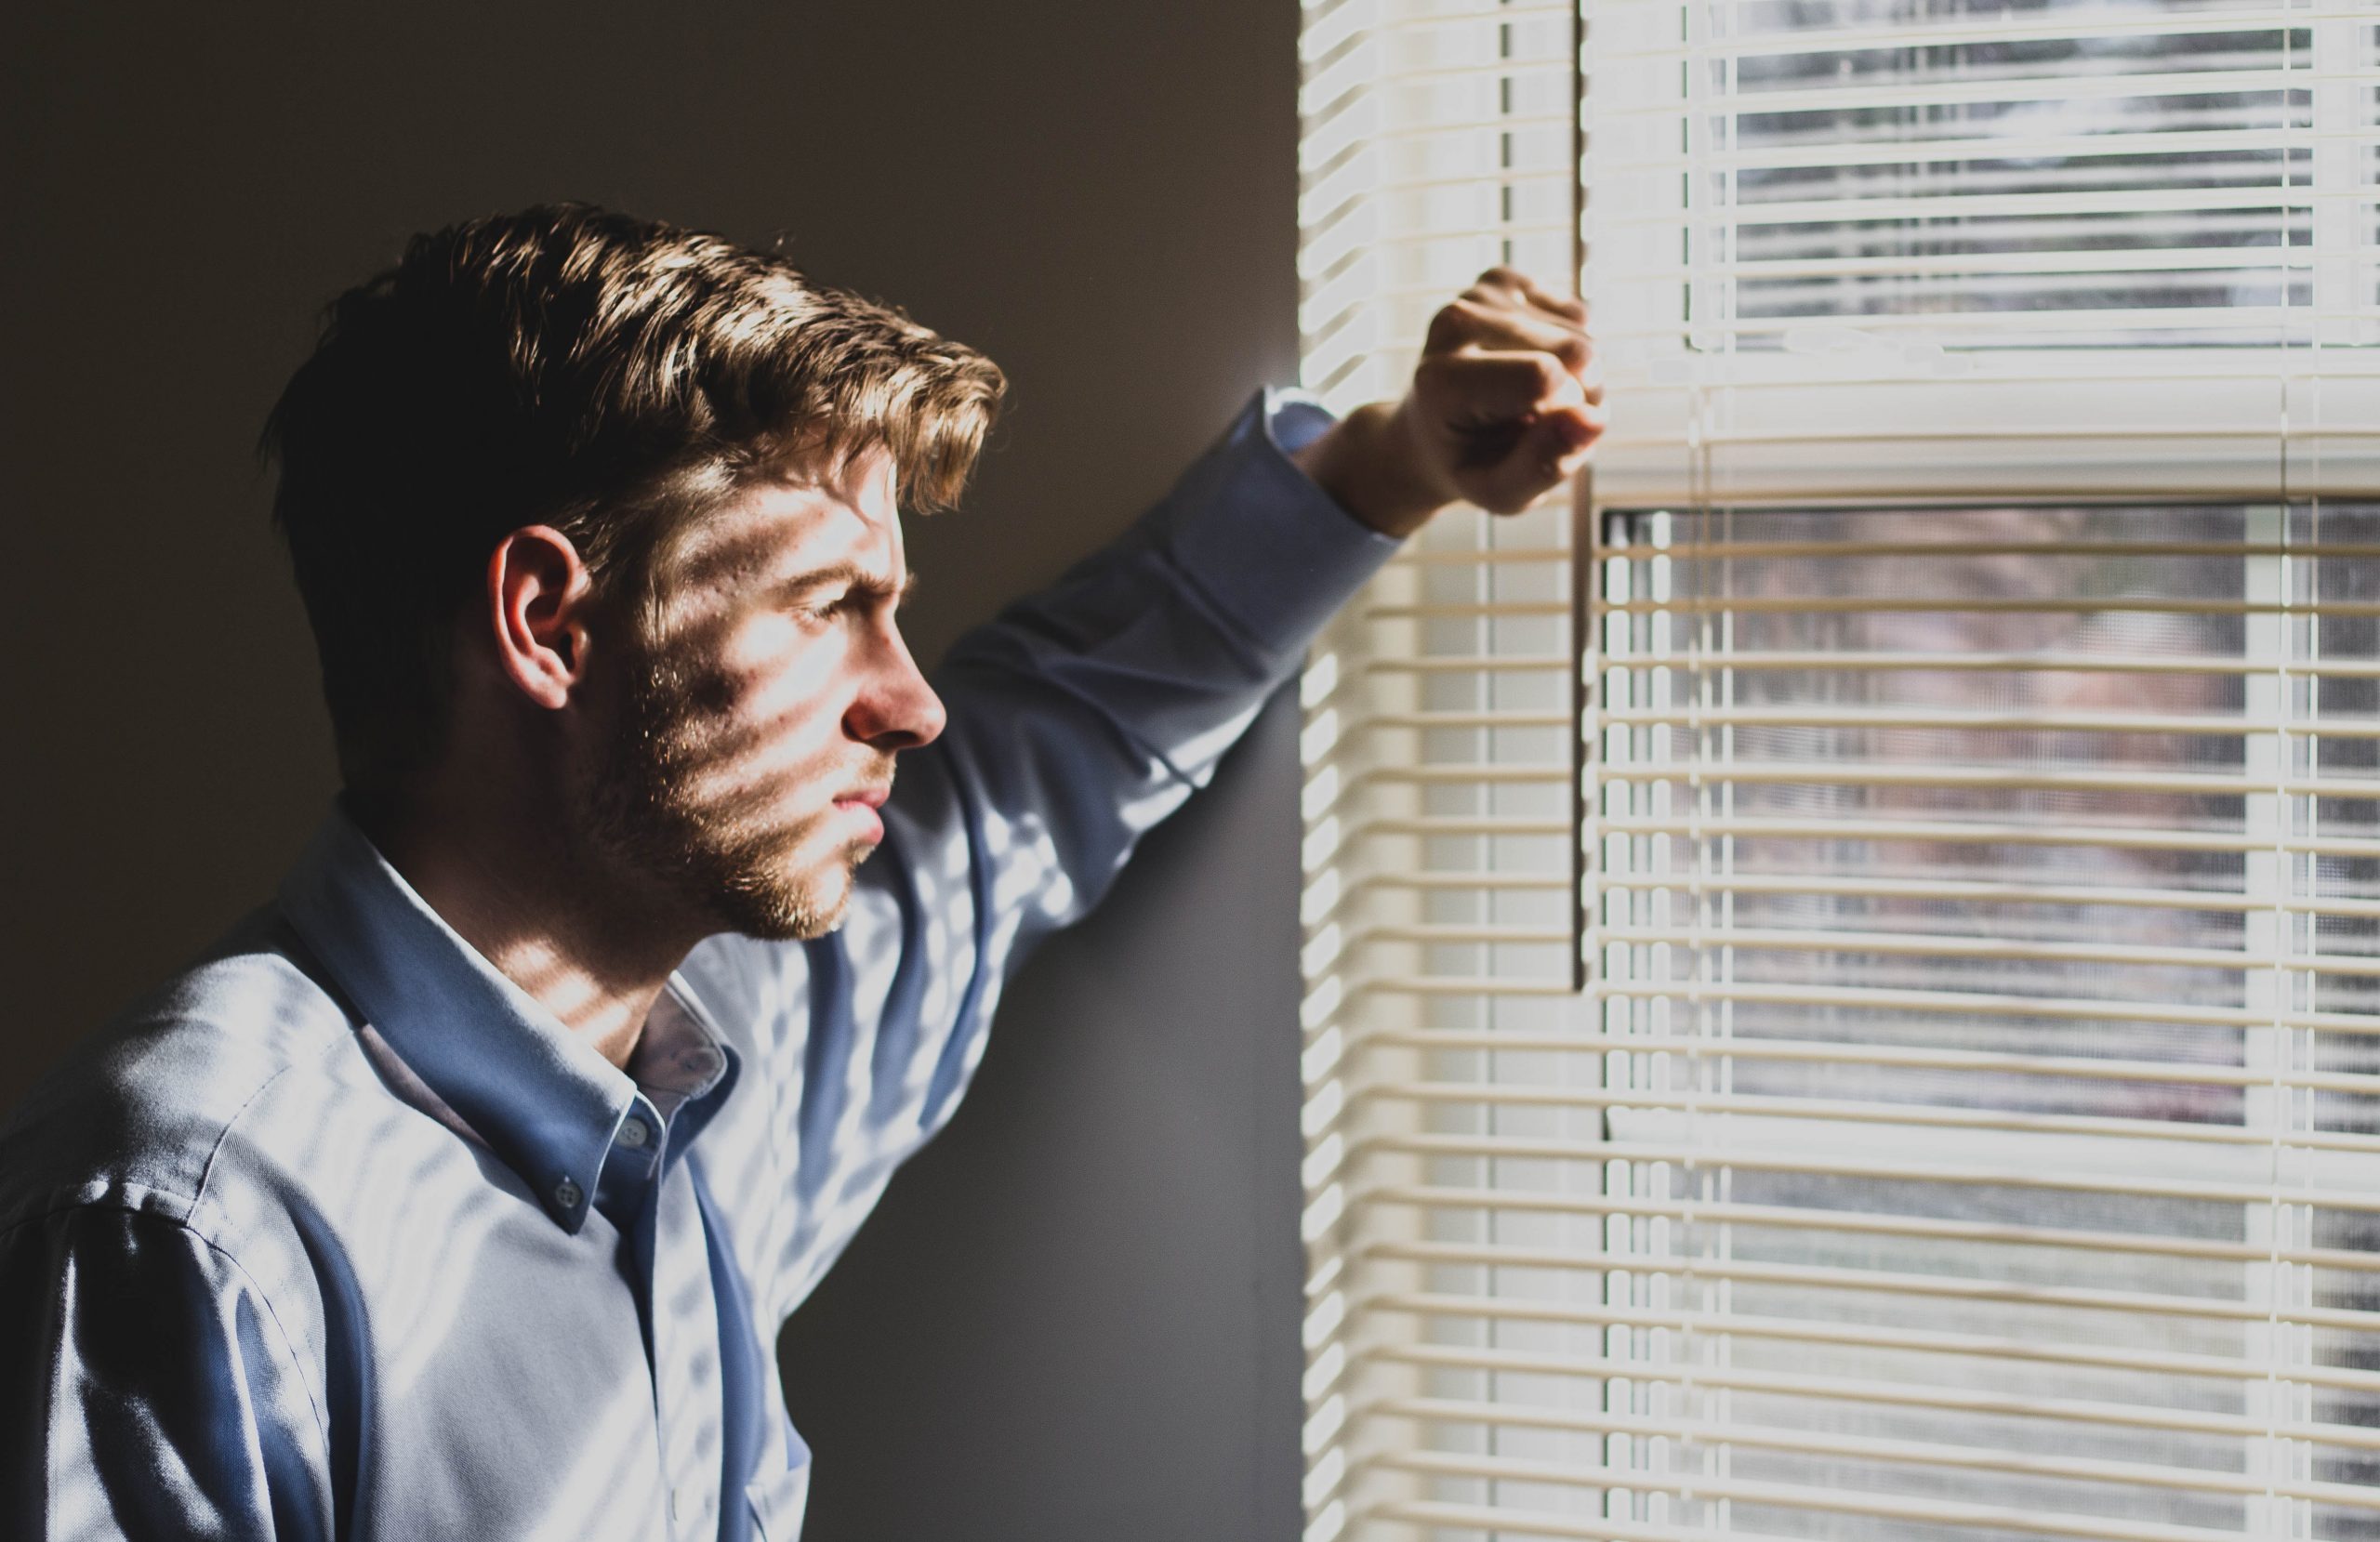 A man looking wistfully out of a window with blinds casting shadows on his face